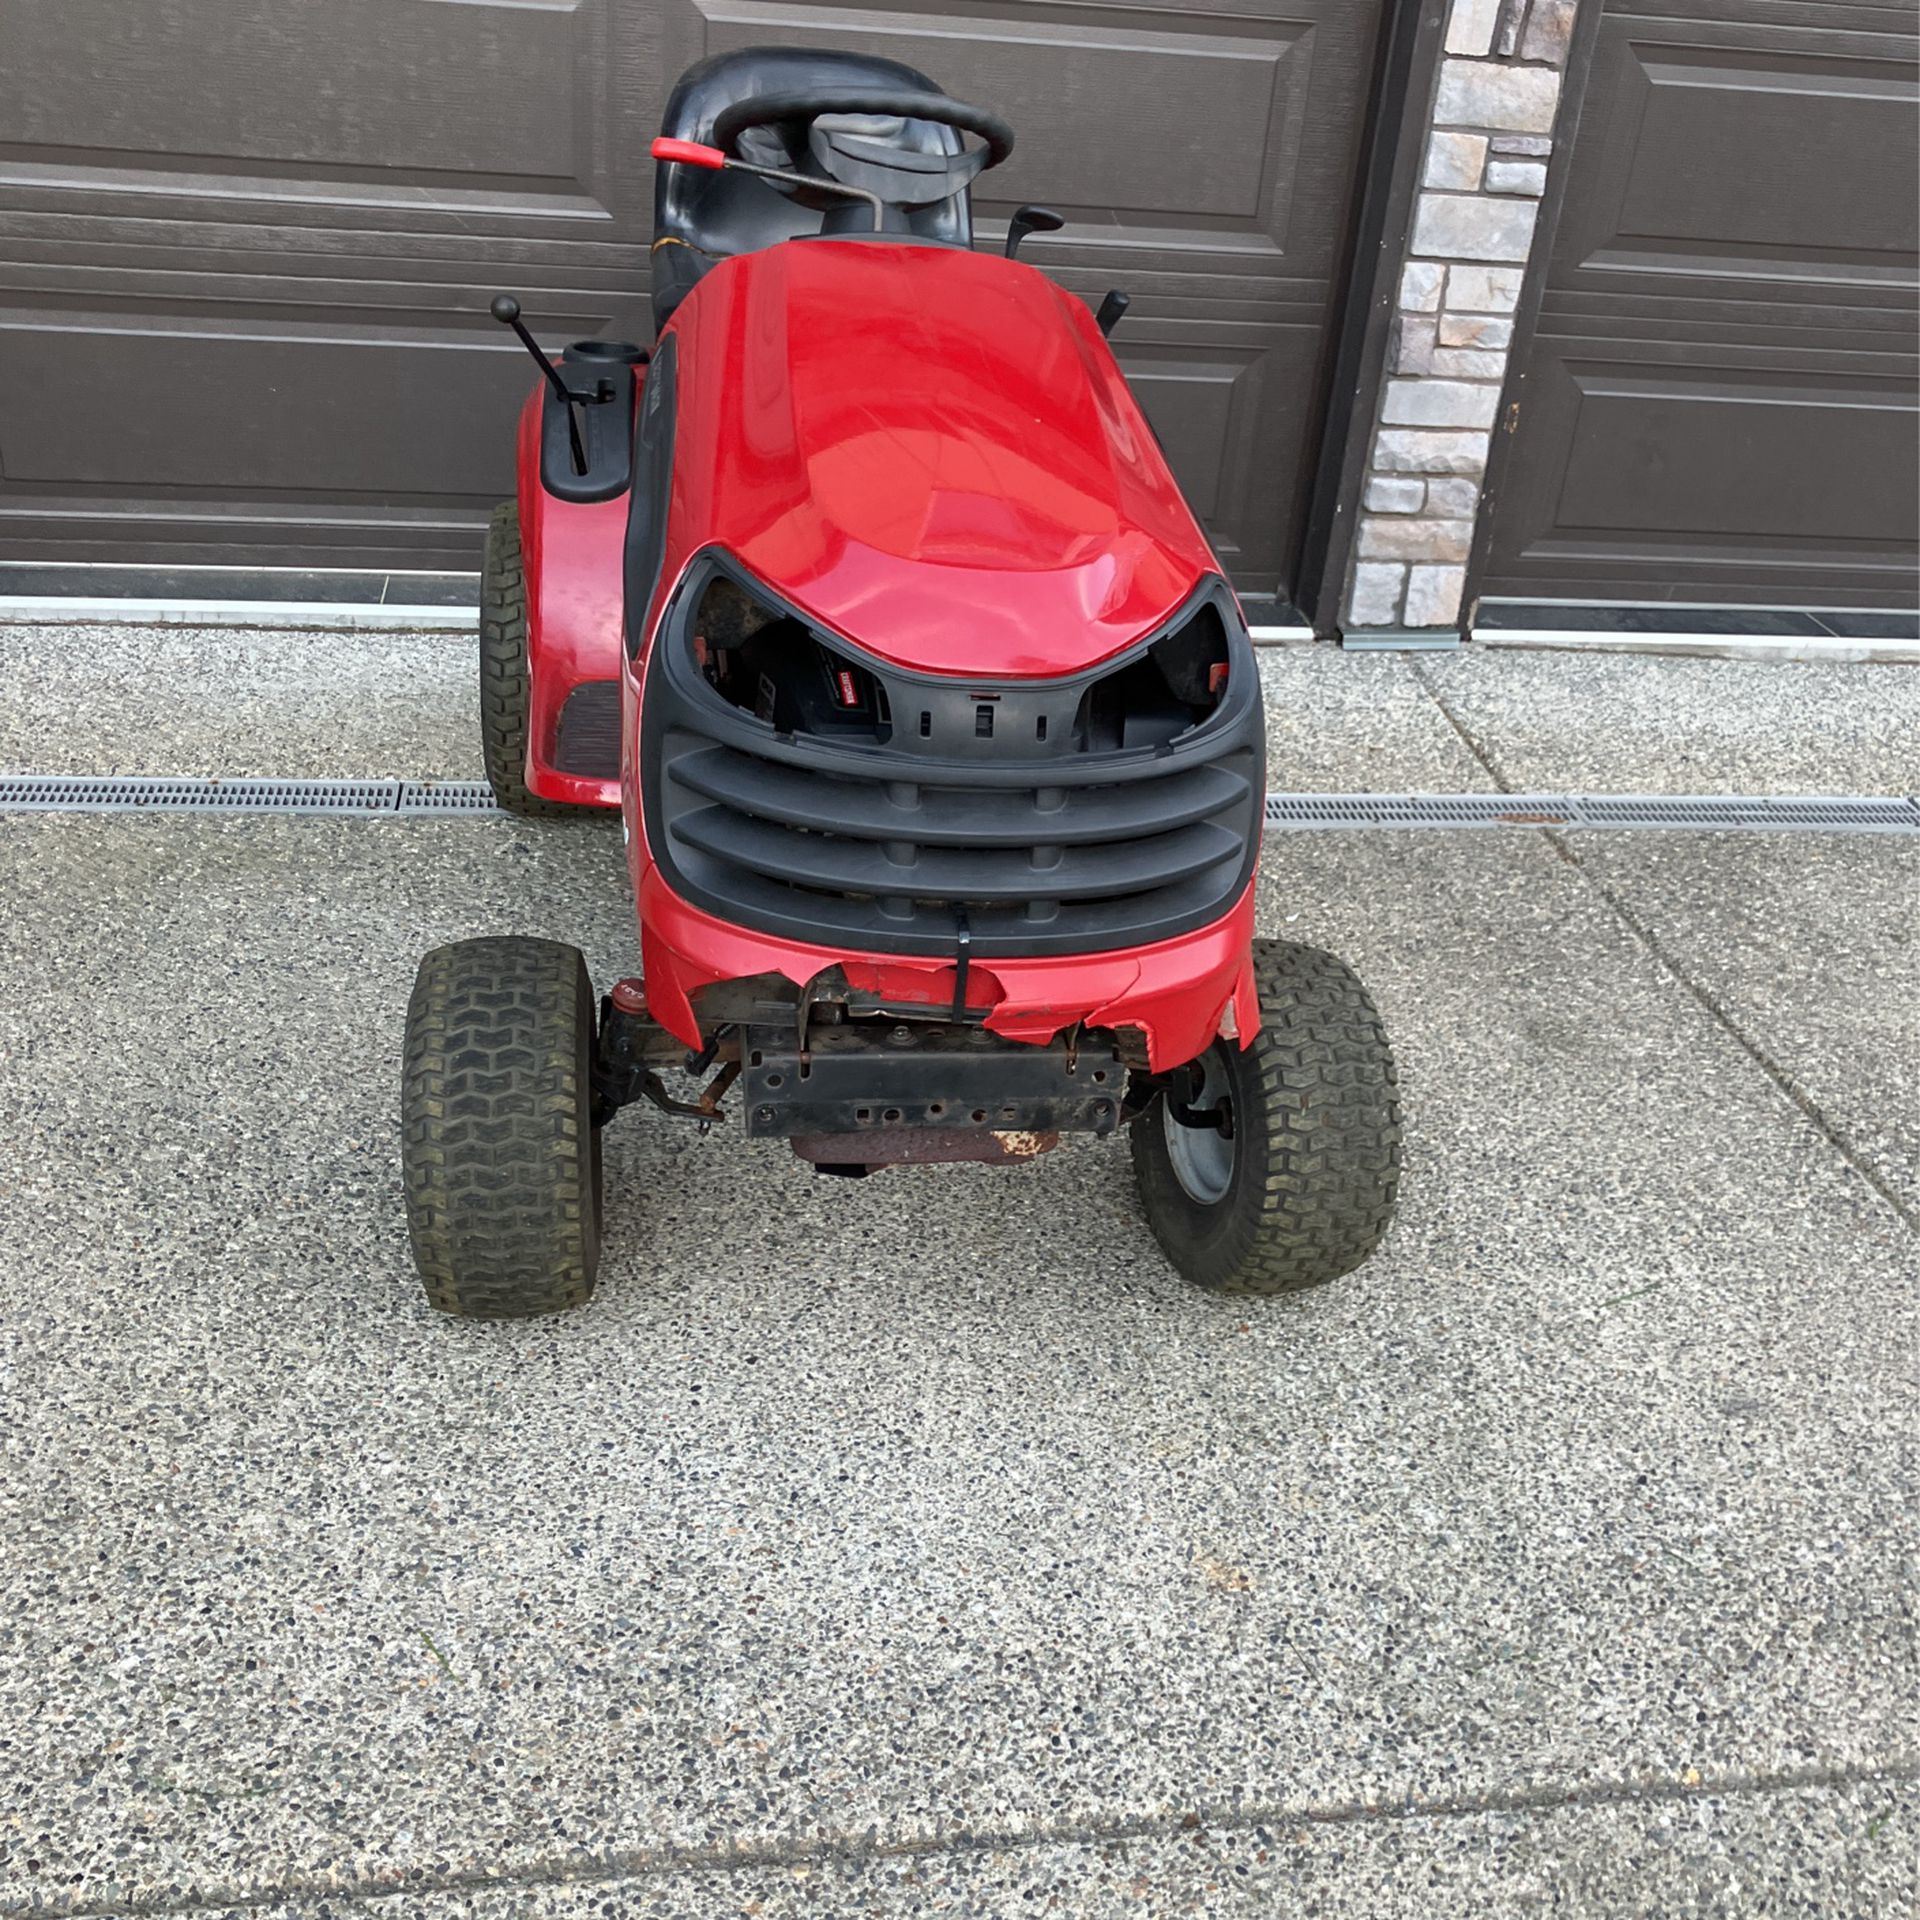 Craftsman Riding Lawn Mower 2013 “does Not Come With Deck”